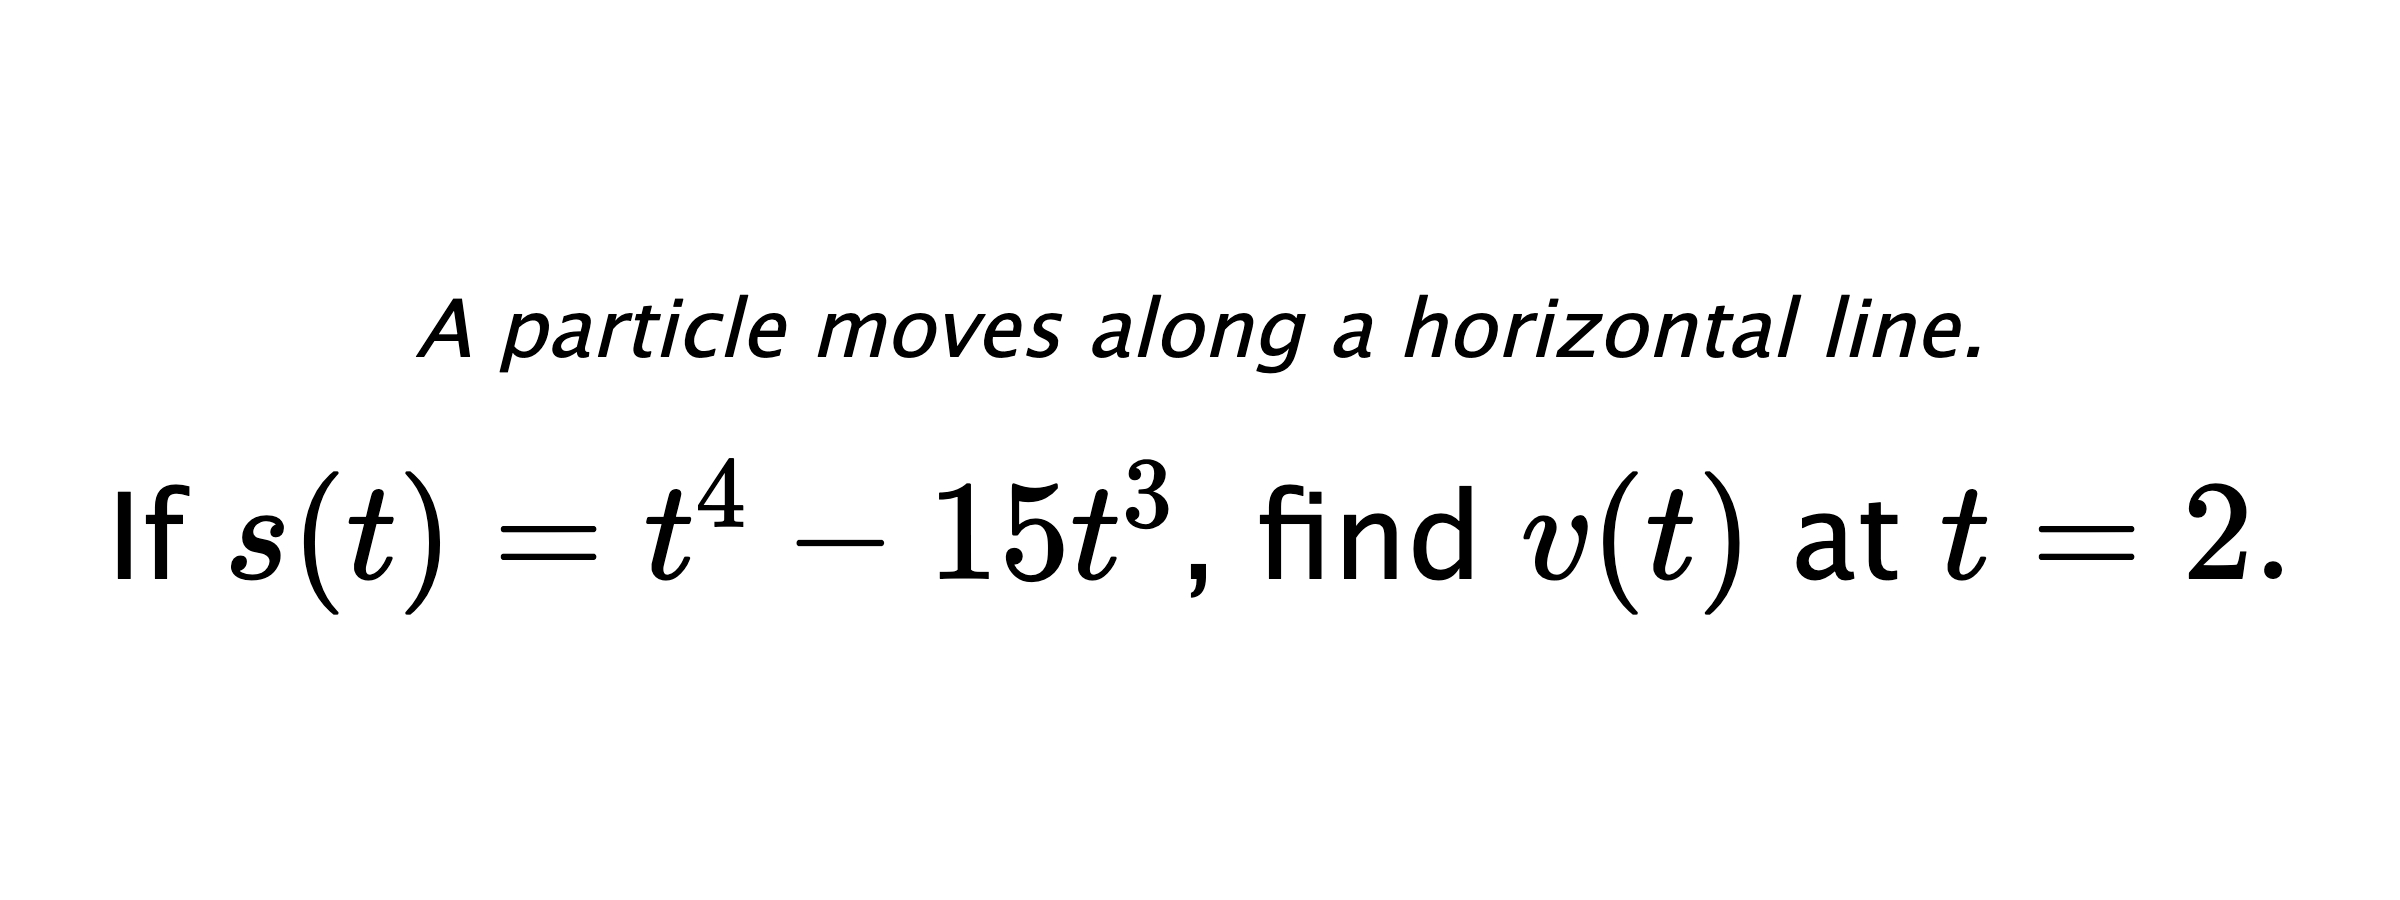 A particle moves along a horizontal line. If $ s(t)=t^4-15t^3 $, find $ v(t) $ at $ t=2 .$